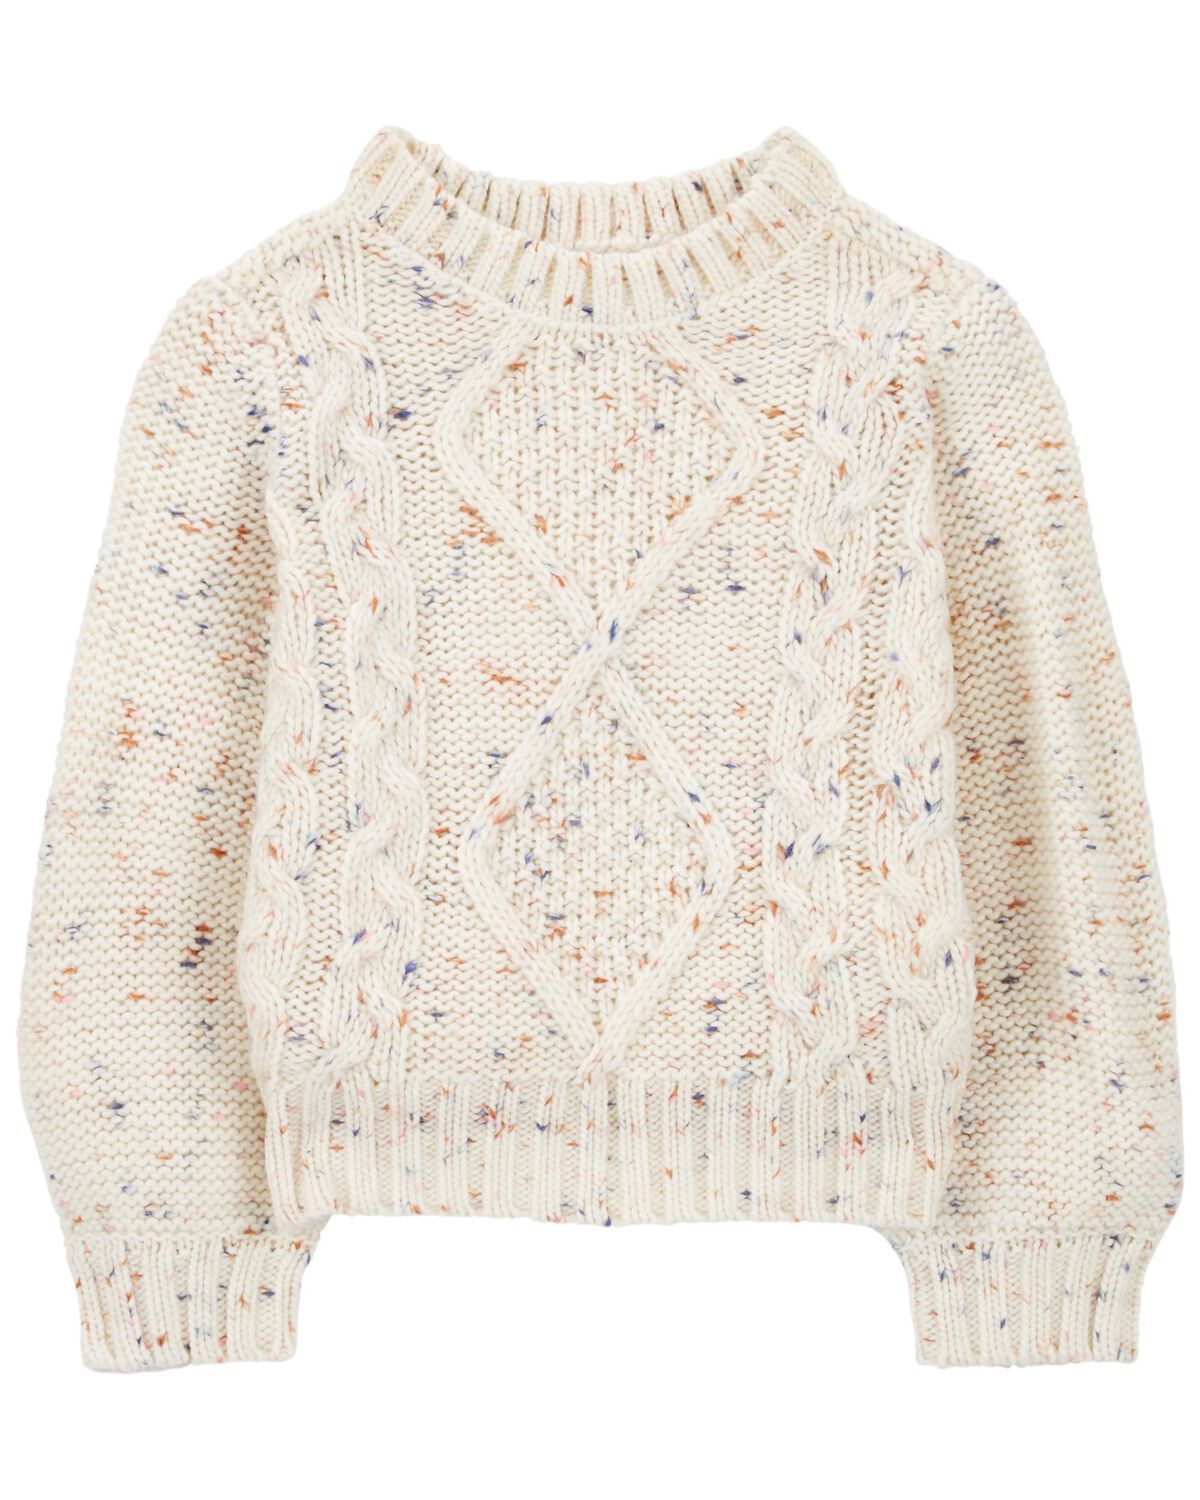 Cream Baby Confetti Cable Knit Pullover Sweater | carters.com | Carter's